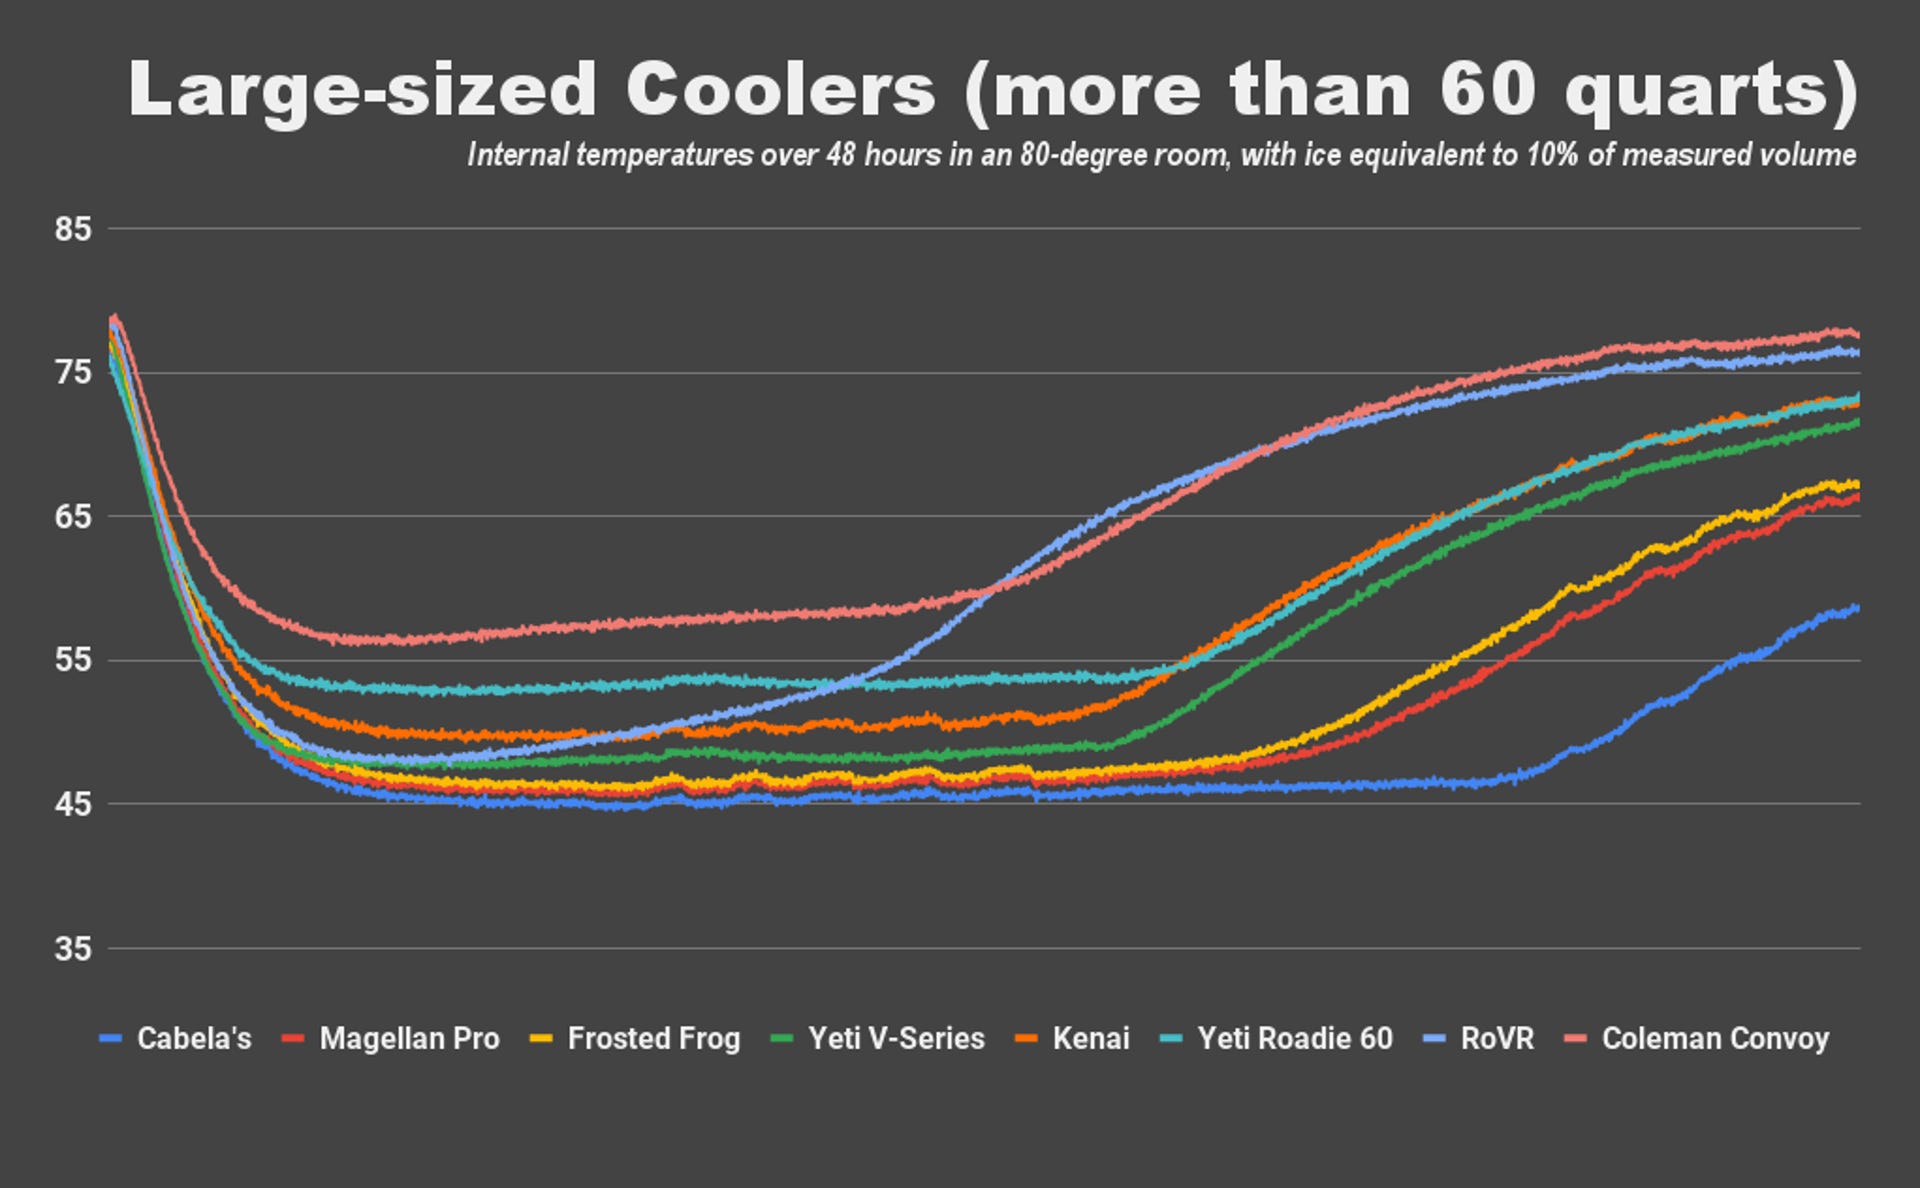 A line graph shows the internal temperatures of several large-sized coolers (more than 60 quarts), each of them sitting in a climate-controlled, 80-degree room over 48 hours with 10% of their respective measured capacities filled with ice. The Cabela's Polar Cap Equalizer cooler is our winner in this category, achieving the lowest temperature of any of them (44.6 degrees F) as well as the lowest average temperature for the duration of the test (54.8 degrees F)..